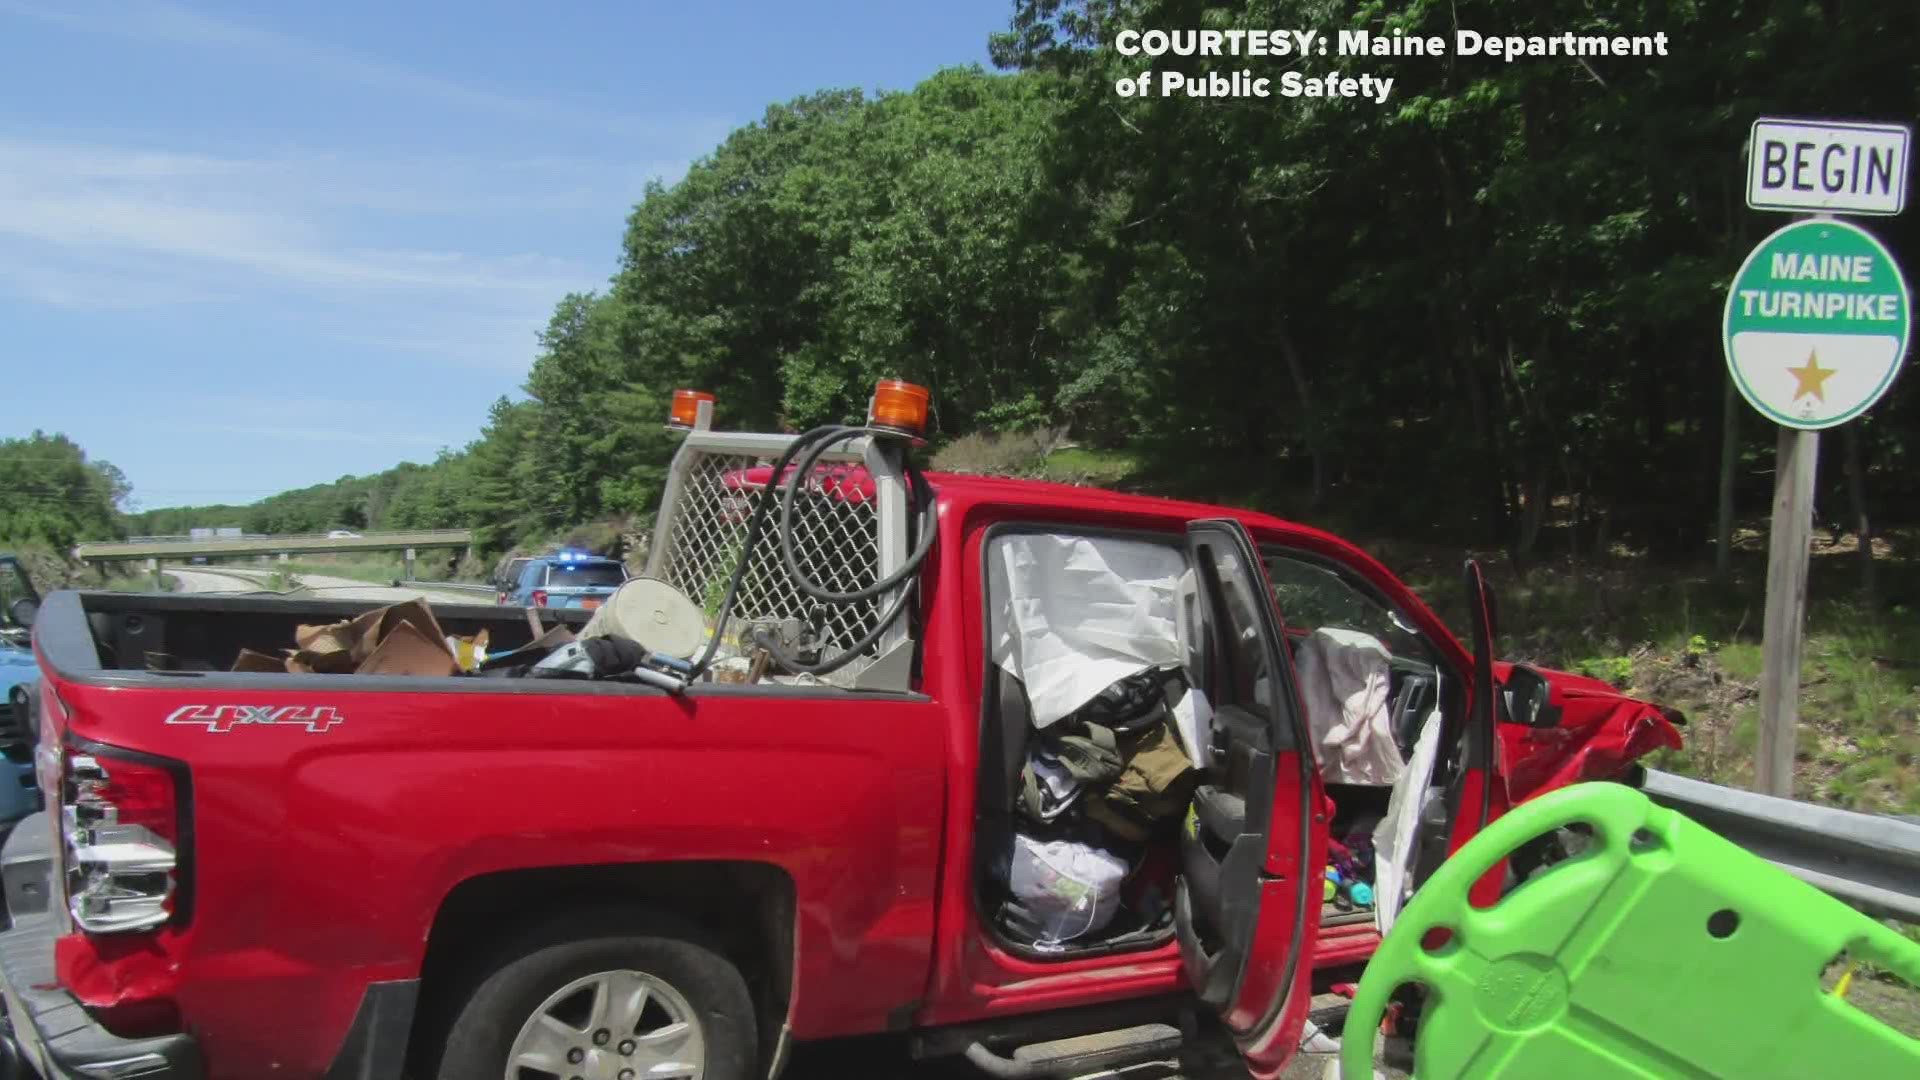 According to Maine State Police, Mary Joe Heffron of N.H. was driving a stolen truck when she lost control and collided head-on with a car on the Falmouth Spur.